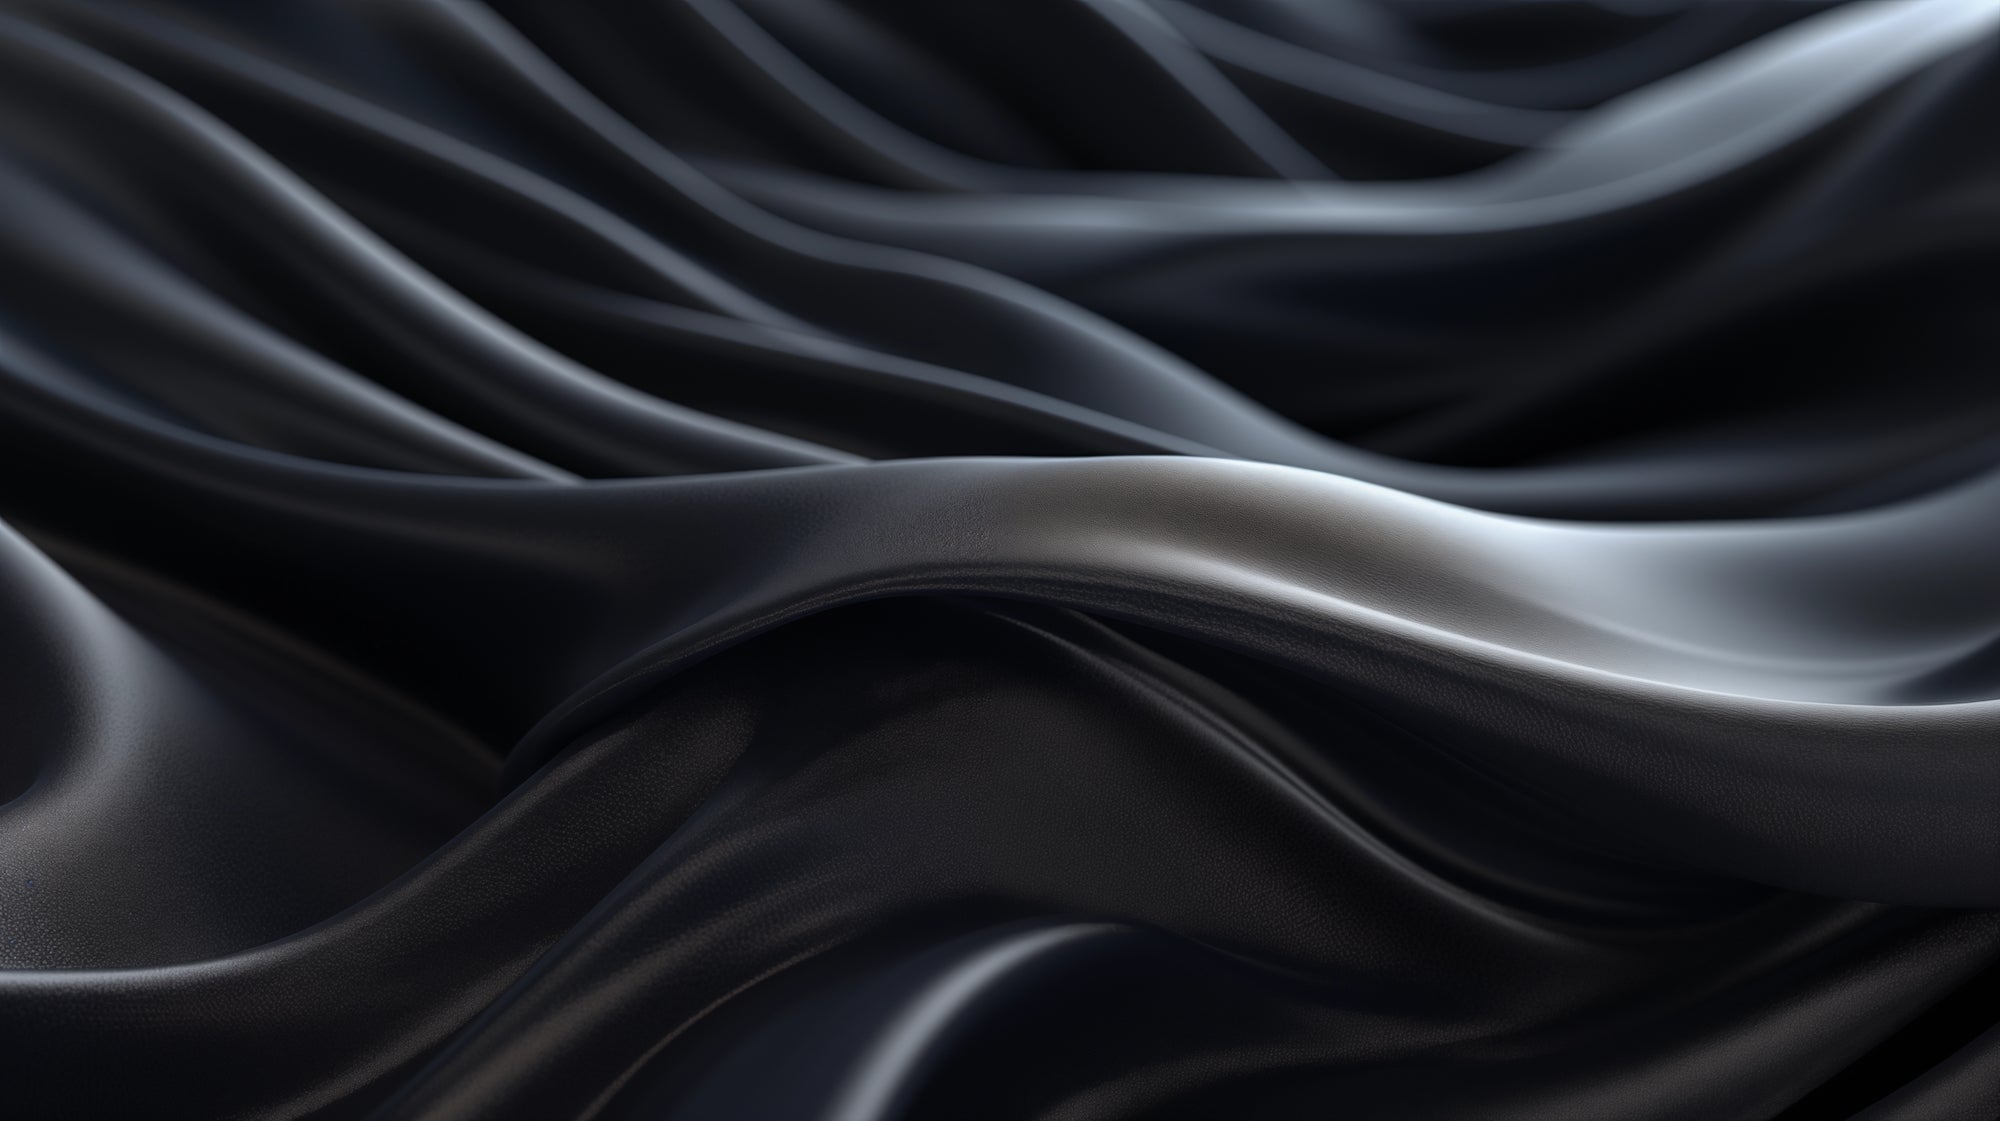 A silky cloth in black color with a shiny exterior